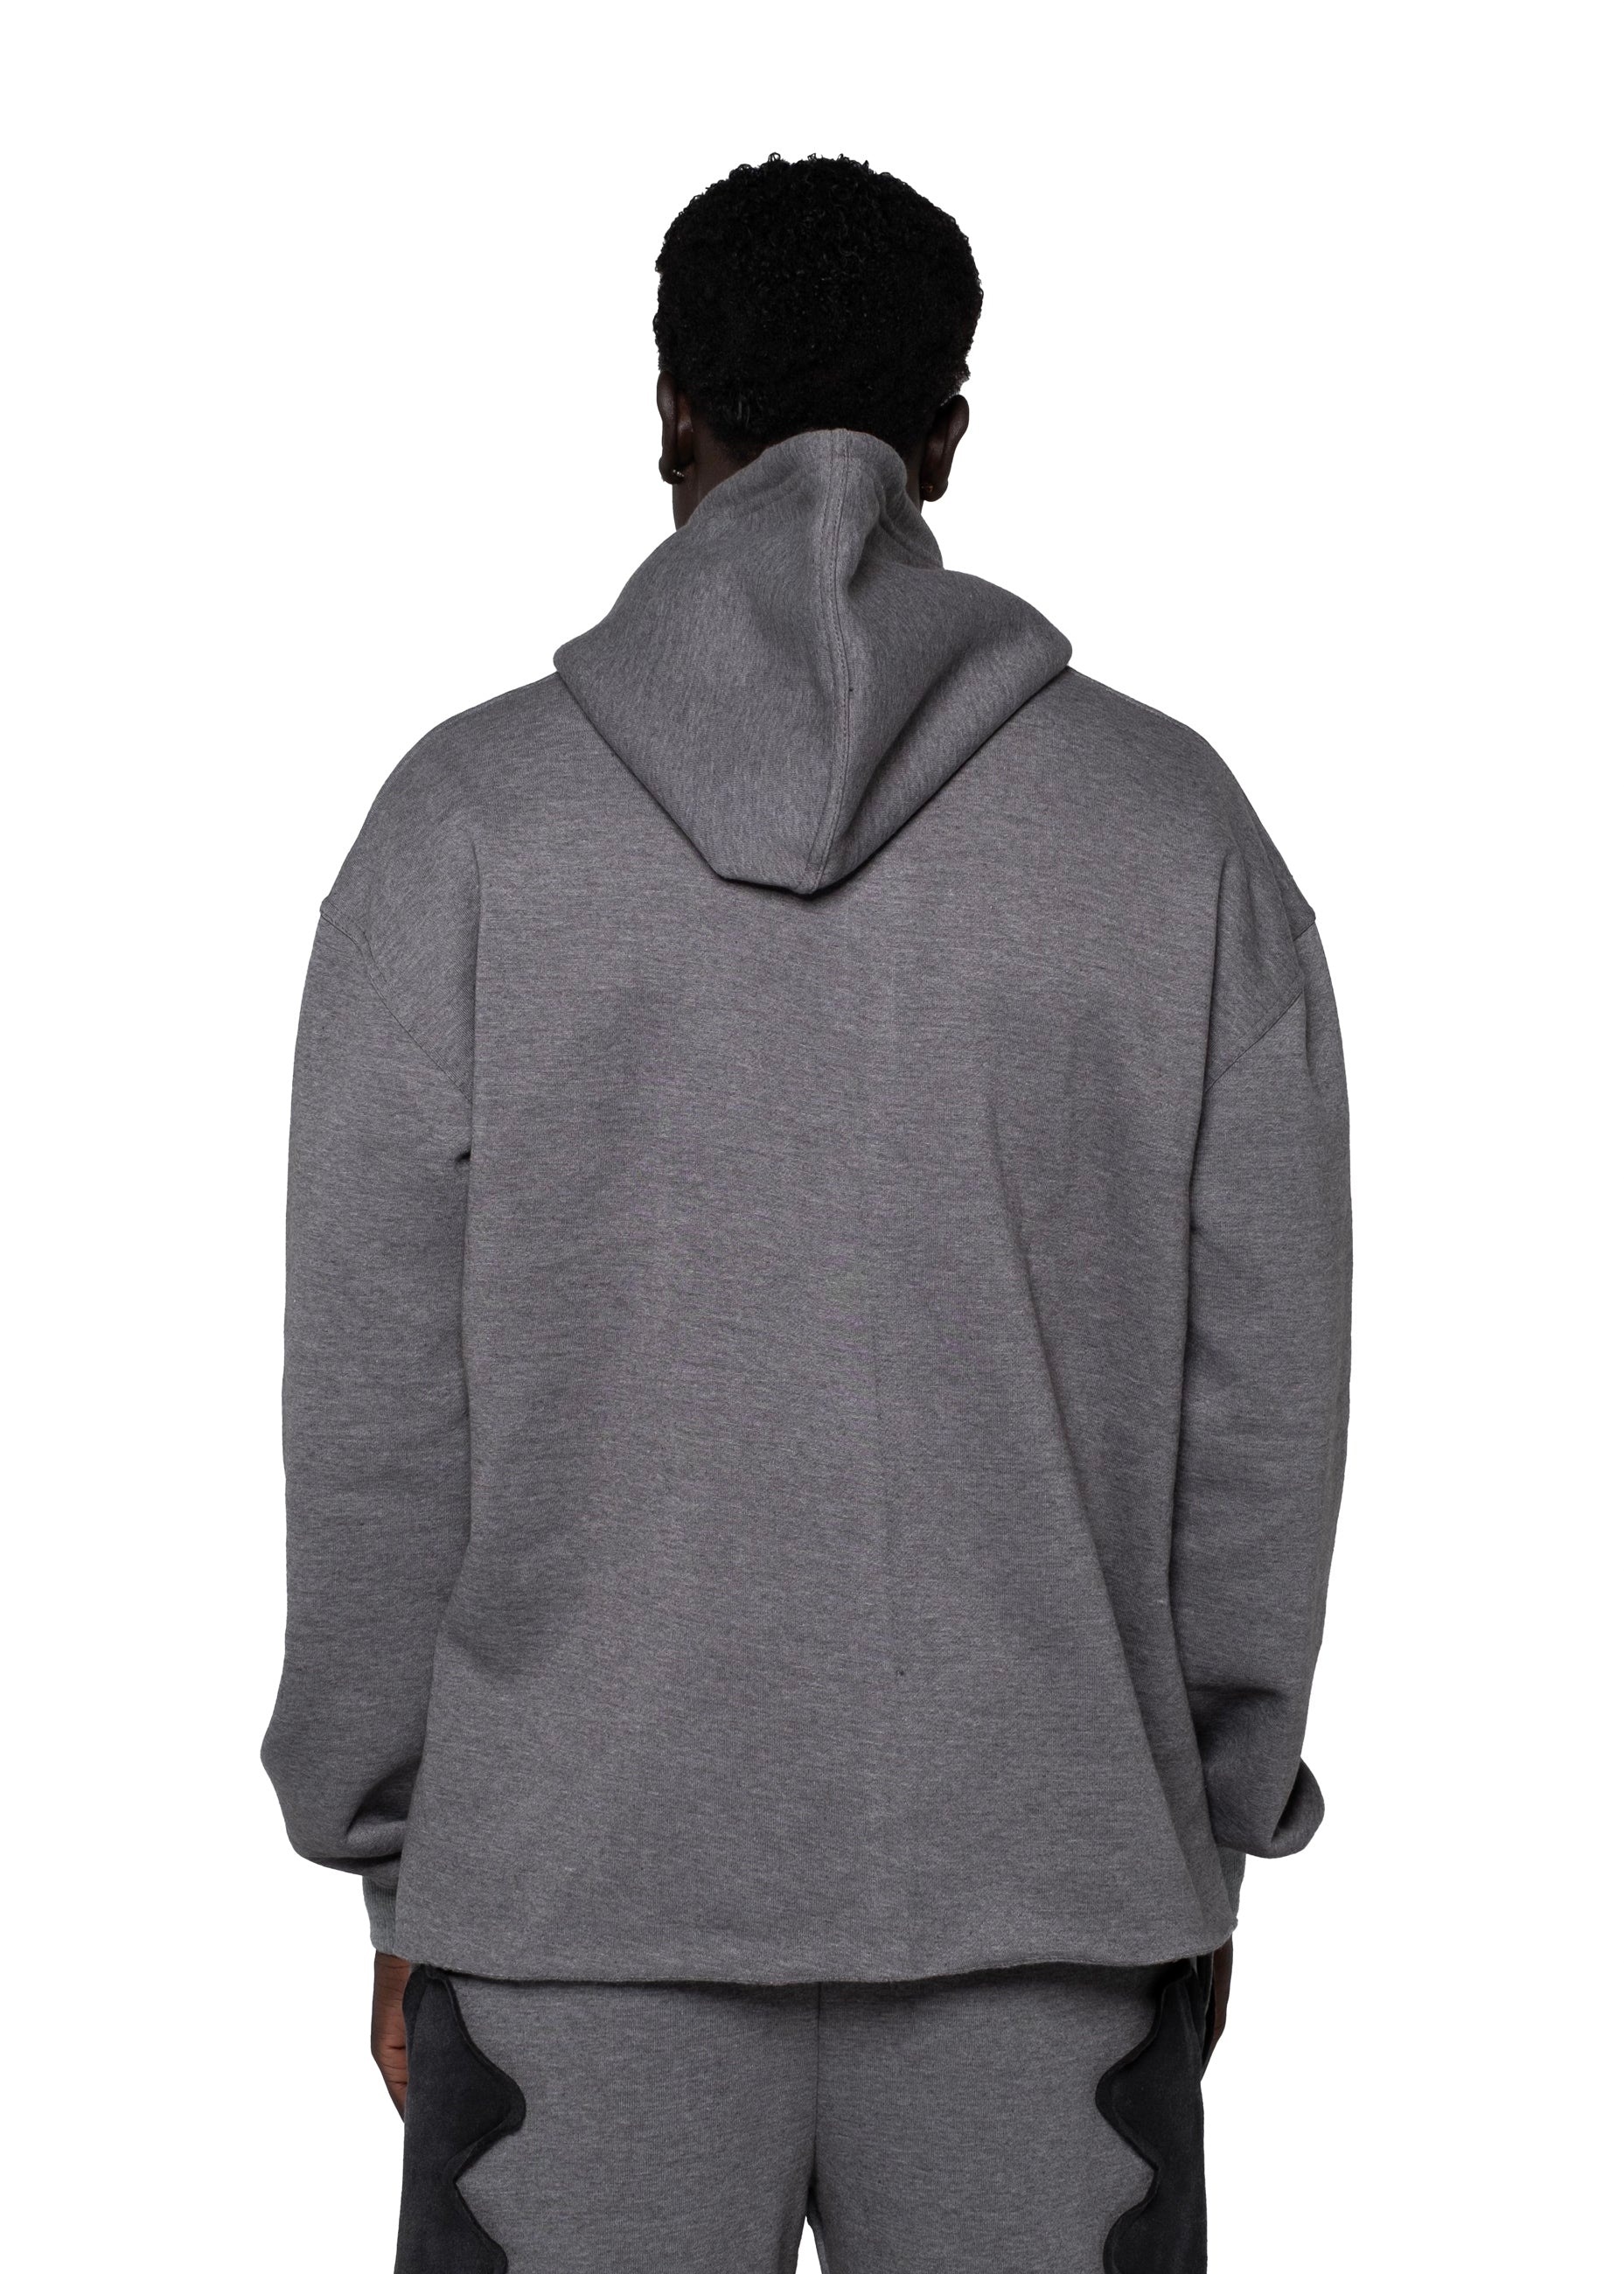 Stitched Clover Hoodie Heathered Gray